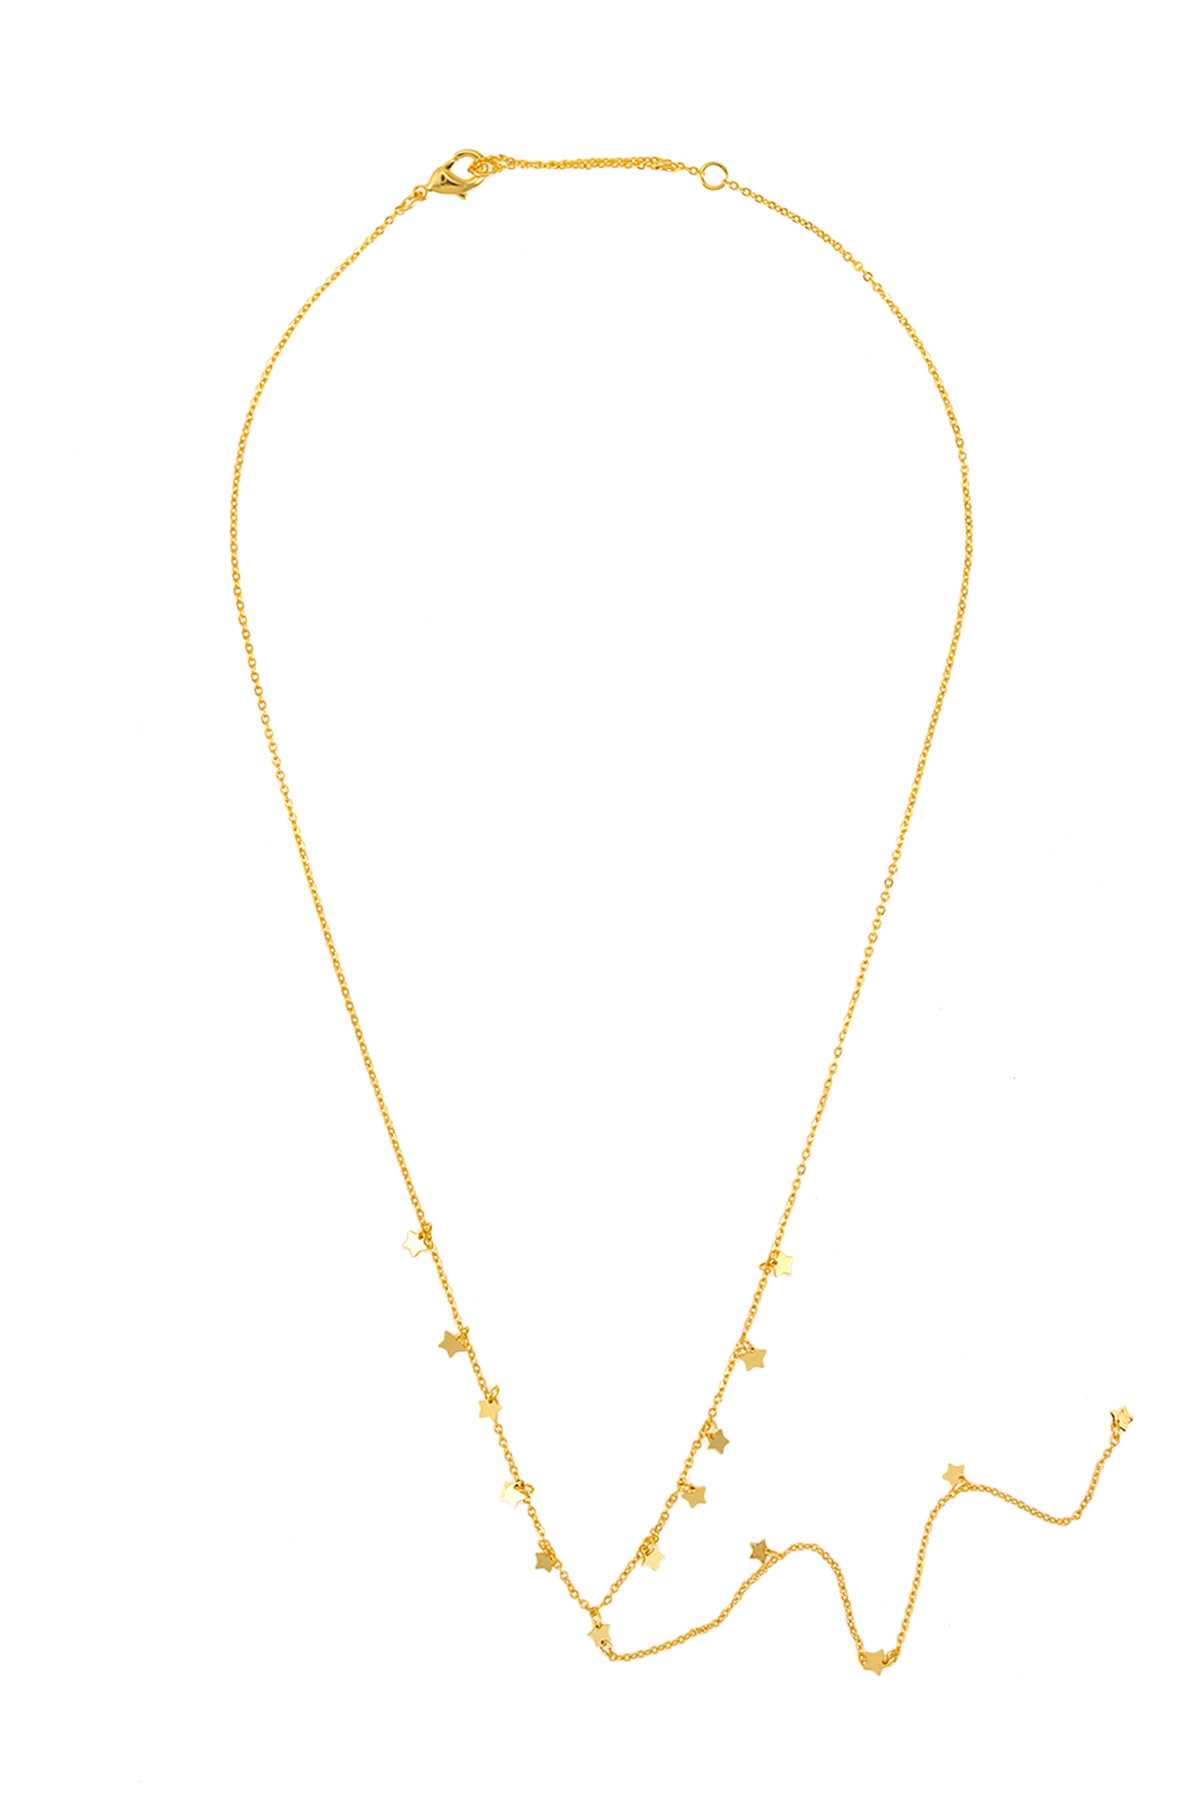 GOLD DIPPED SMALL STAR CHARM LARIAT NECKLACE